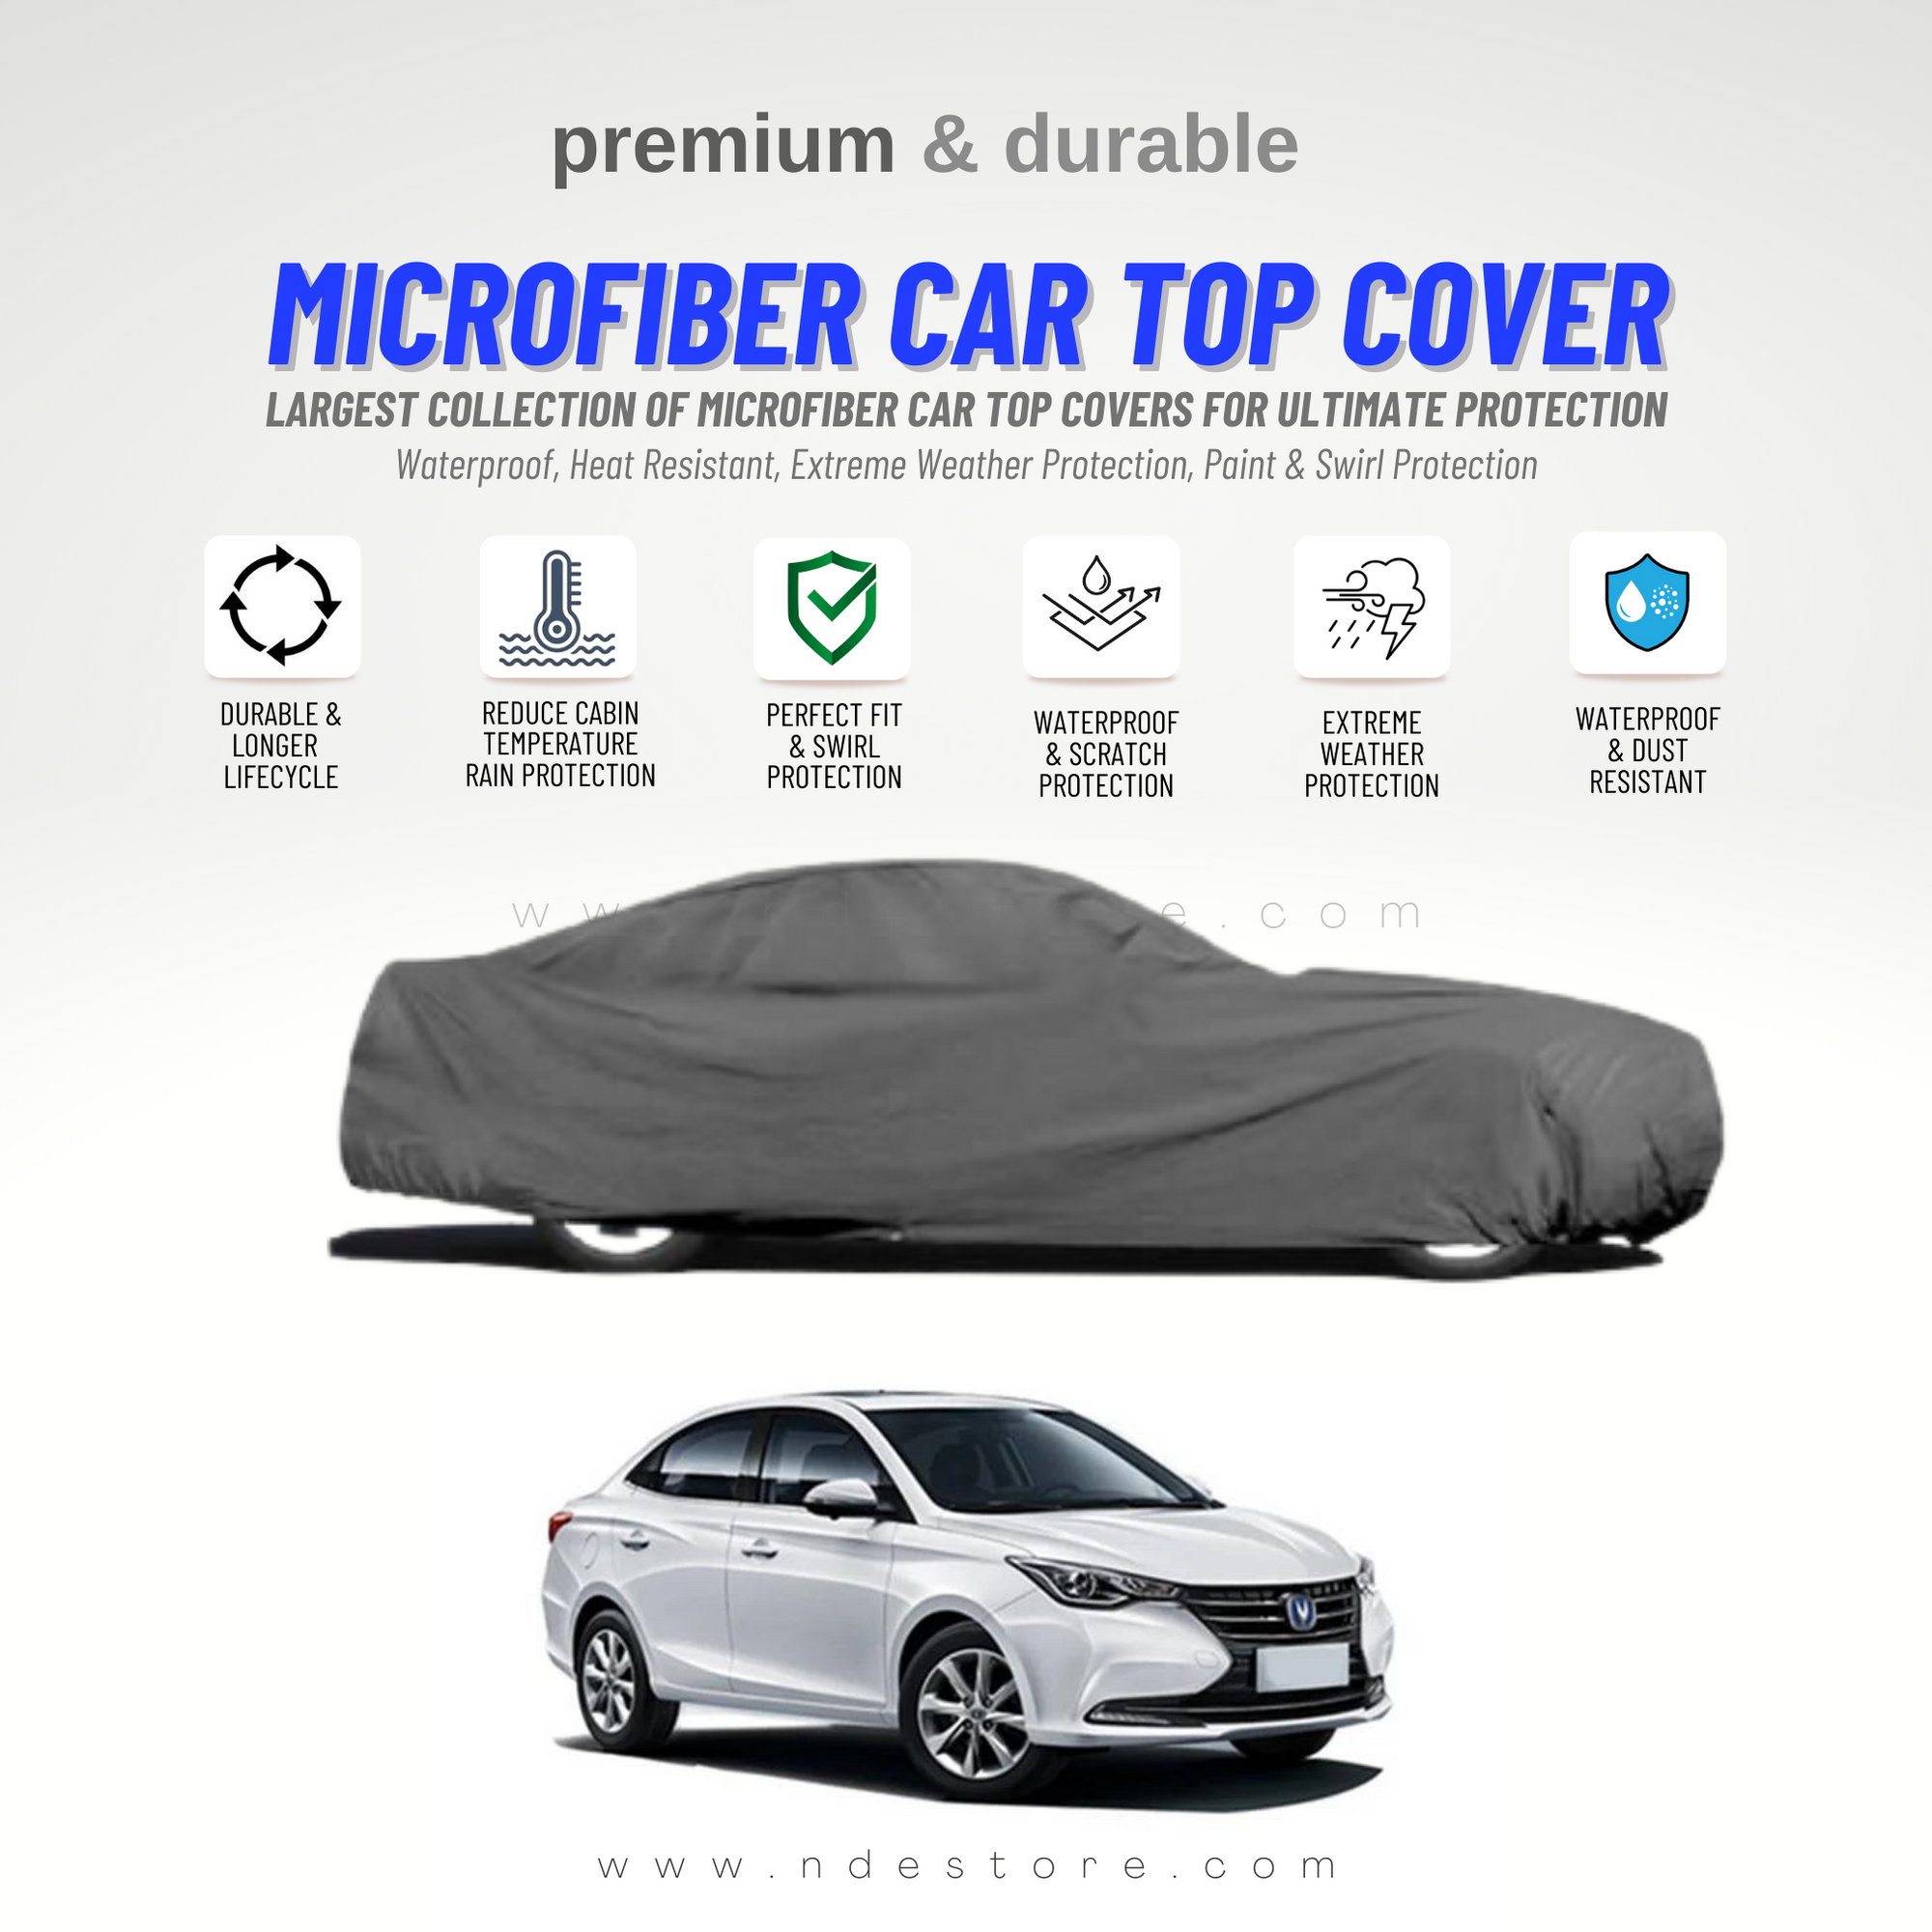 TOP COVER MICROFIBER FOR CHANGAN ALSVIN